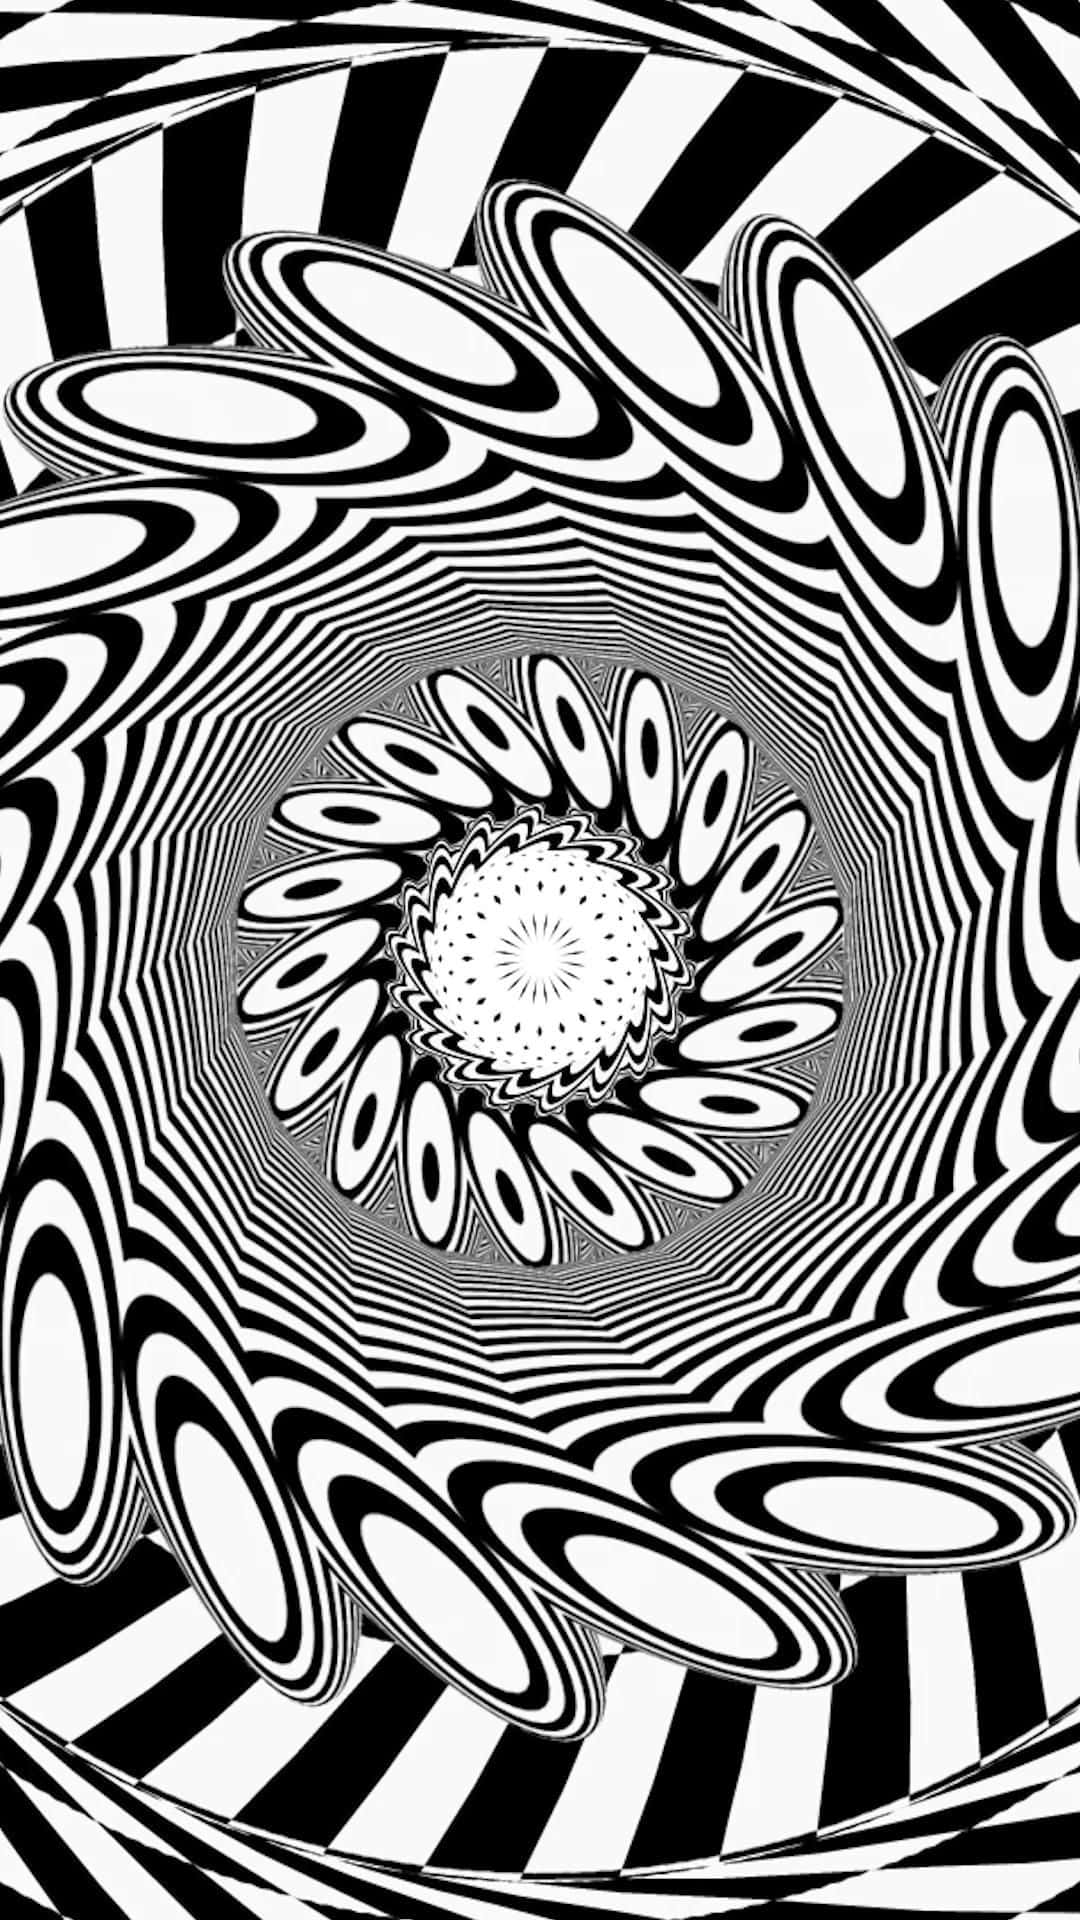 Abstract Spiral Optical Illusion Picture 1080 x 1920 Picture